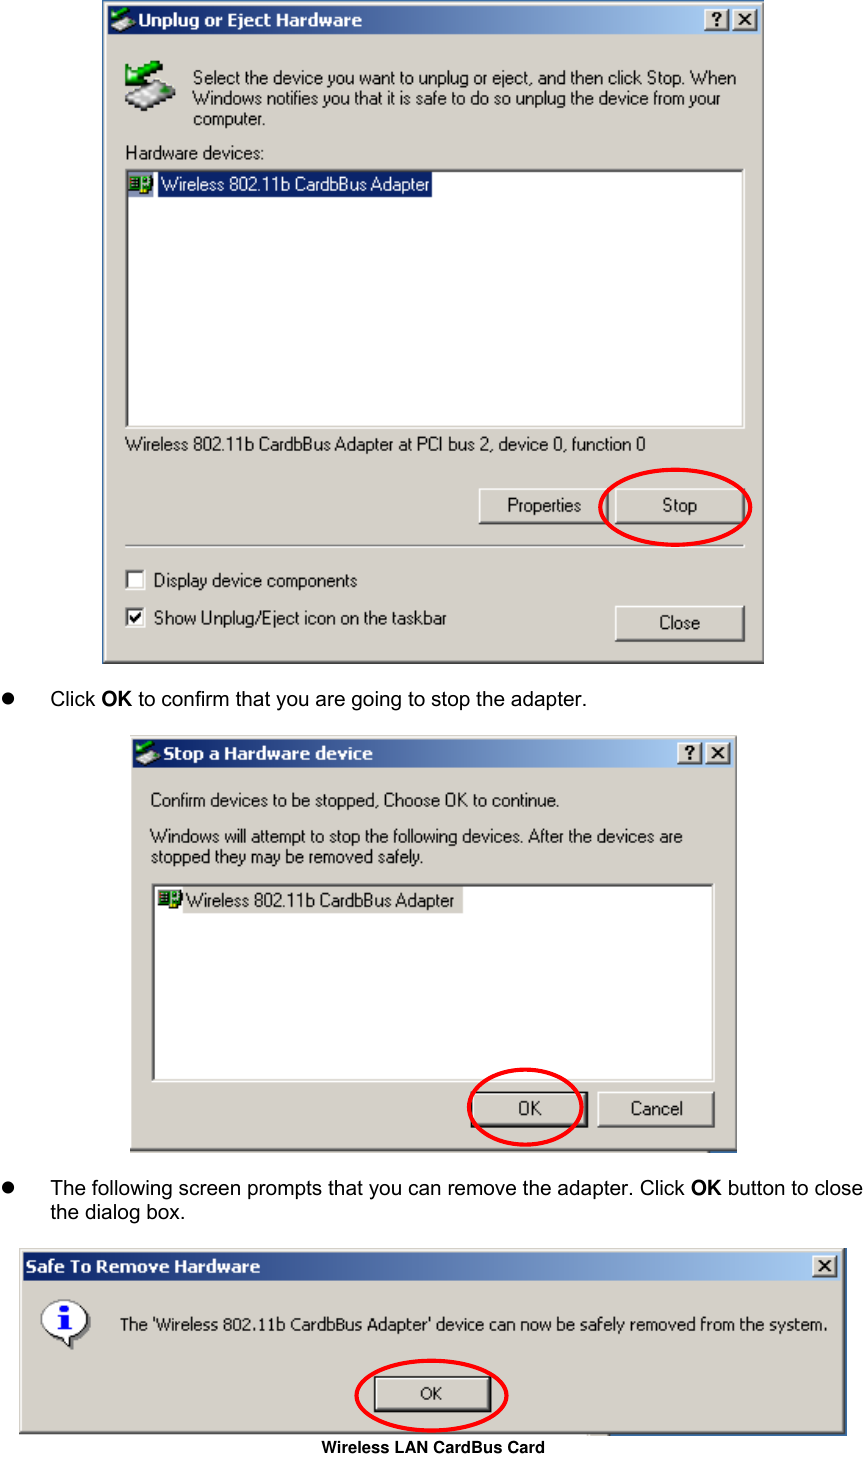     Click OK to confirm that you are going to stop the adapter.        The following screen prompts that you can remove the adapter. Click OK button to close the dialog box.  Wireless LAN CardBus Card  